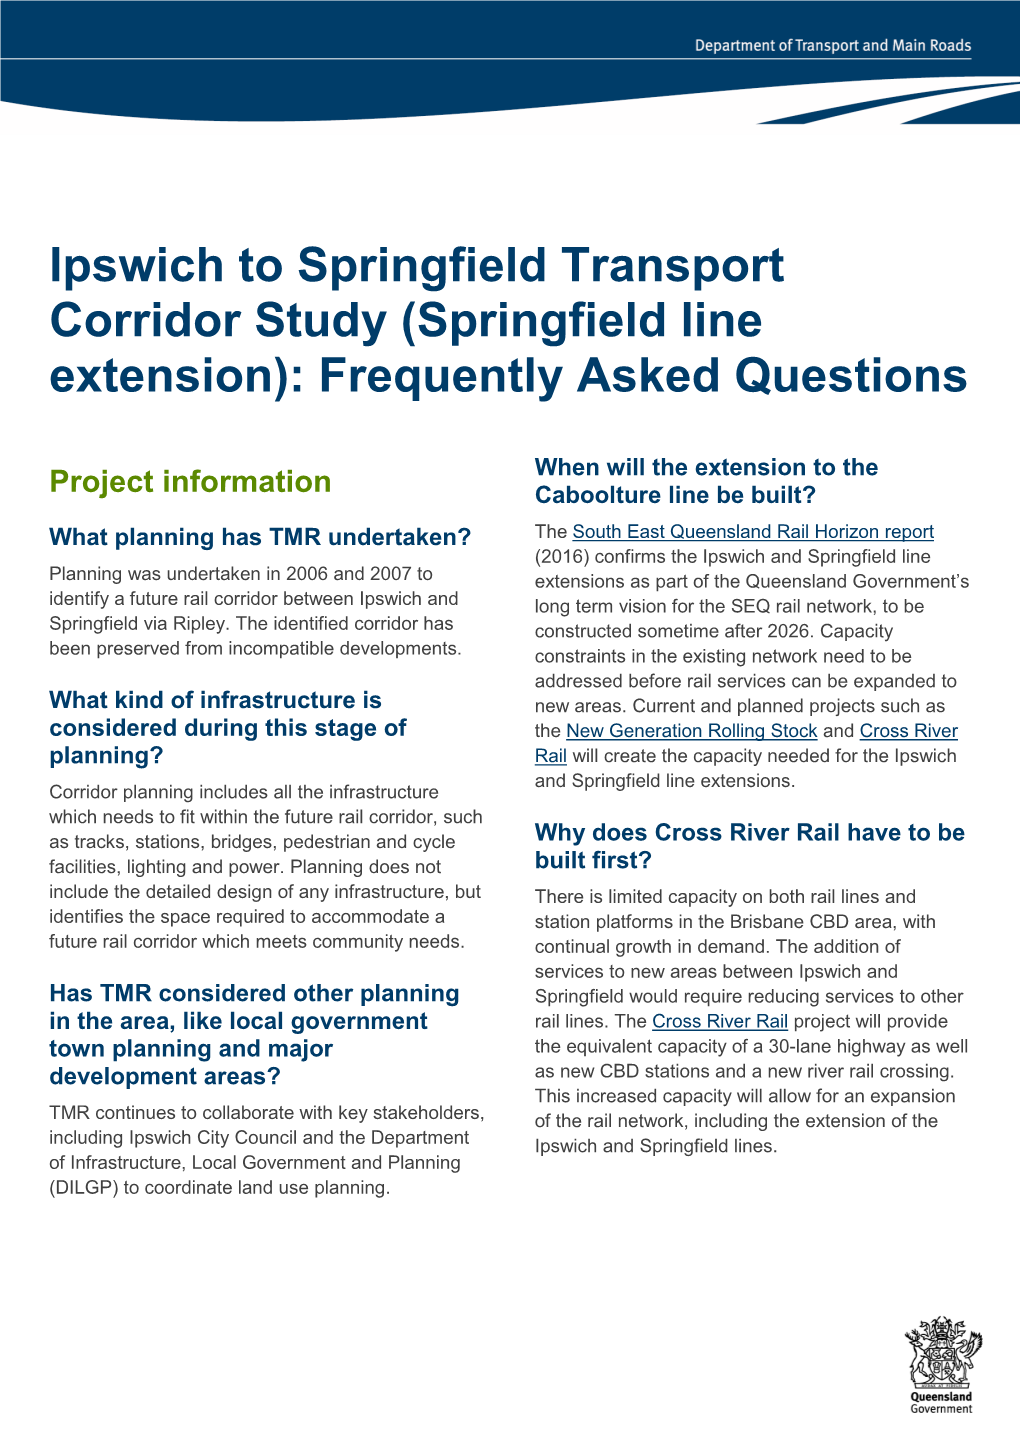 Ipswich to Springfield Transport Corridor Study (Springfield Line Extension): Frequently Asked Questions